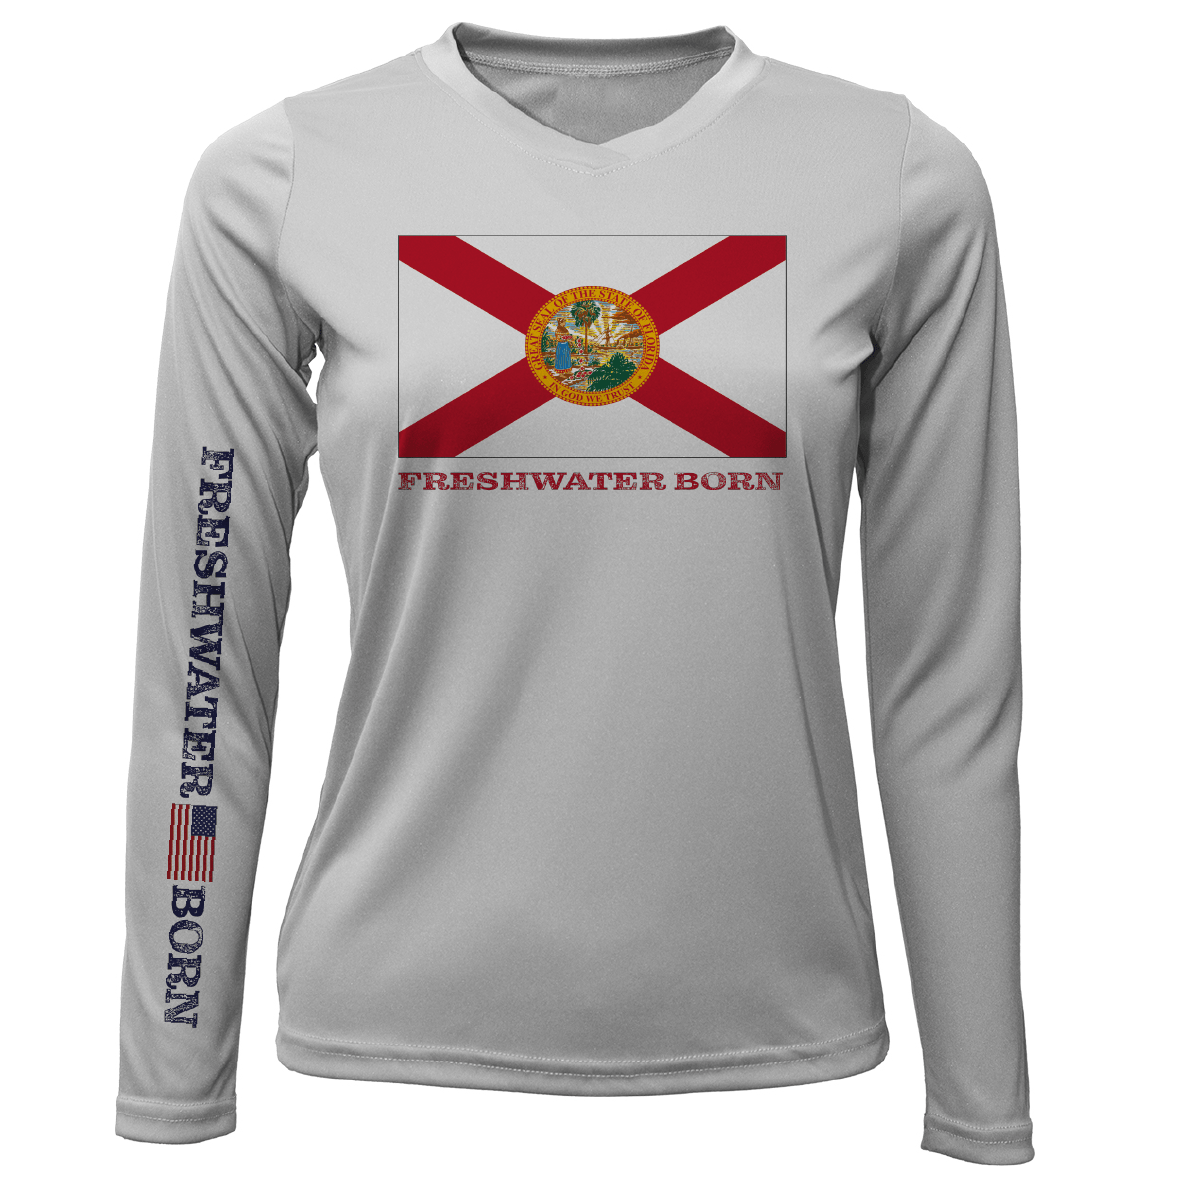 Saltwater Born UPF 50+ Long Sleeve S / SILVER Florida Flag Freshwater Born Women's Long Sleeve UPF 50+ Dry-Fit Shirt